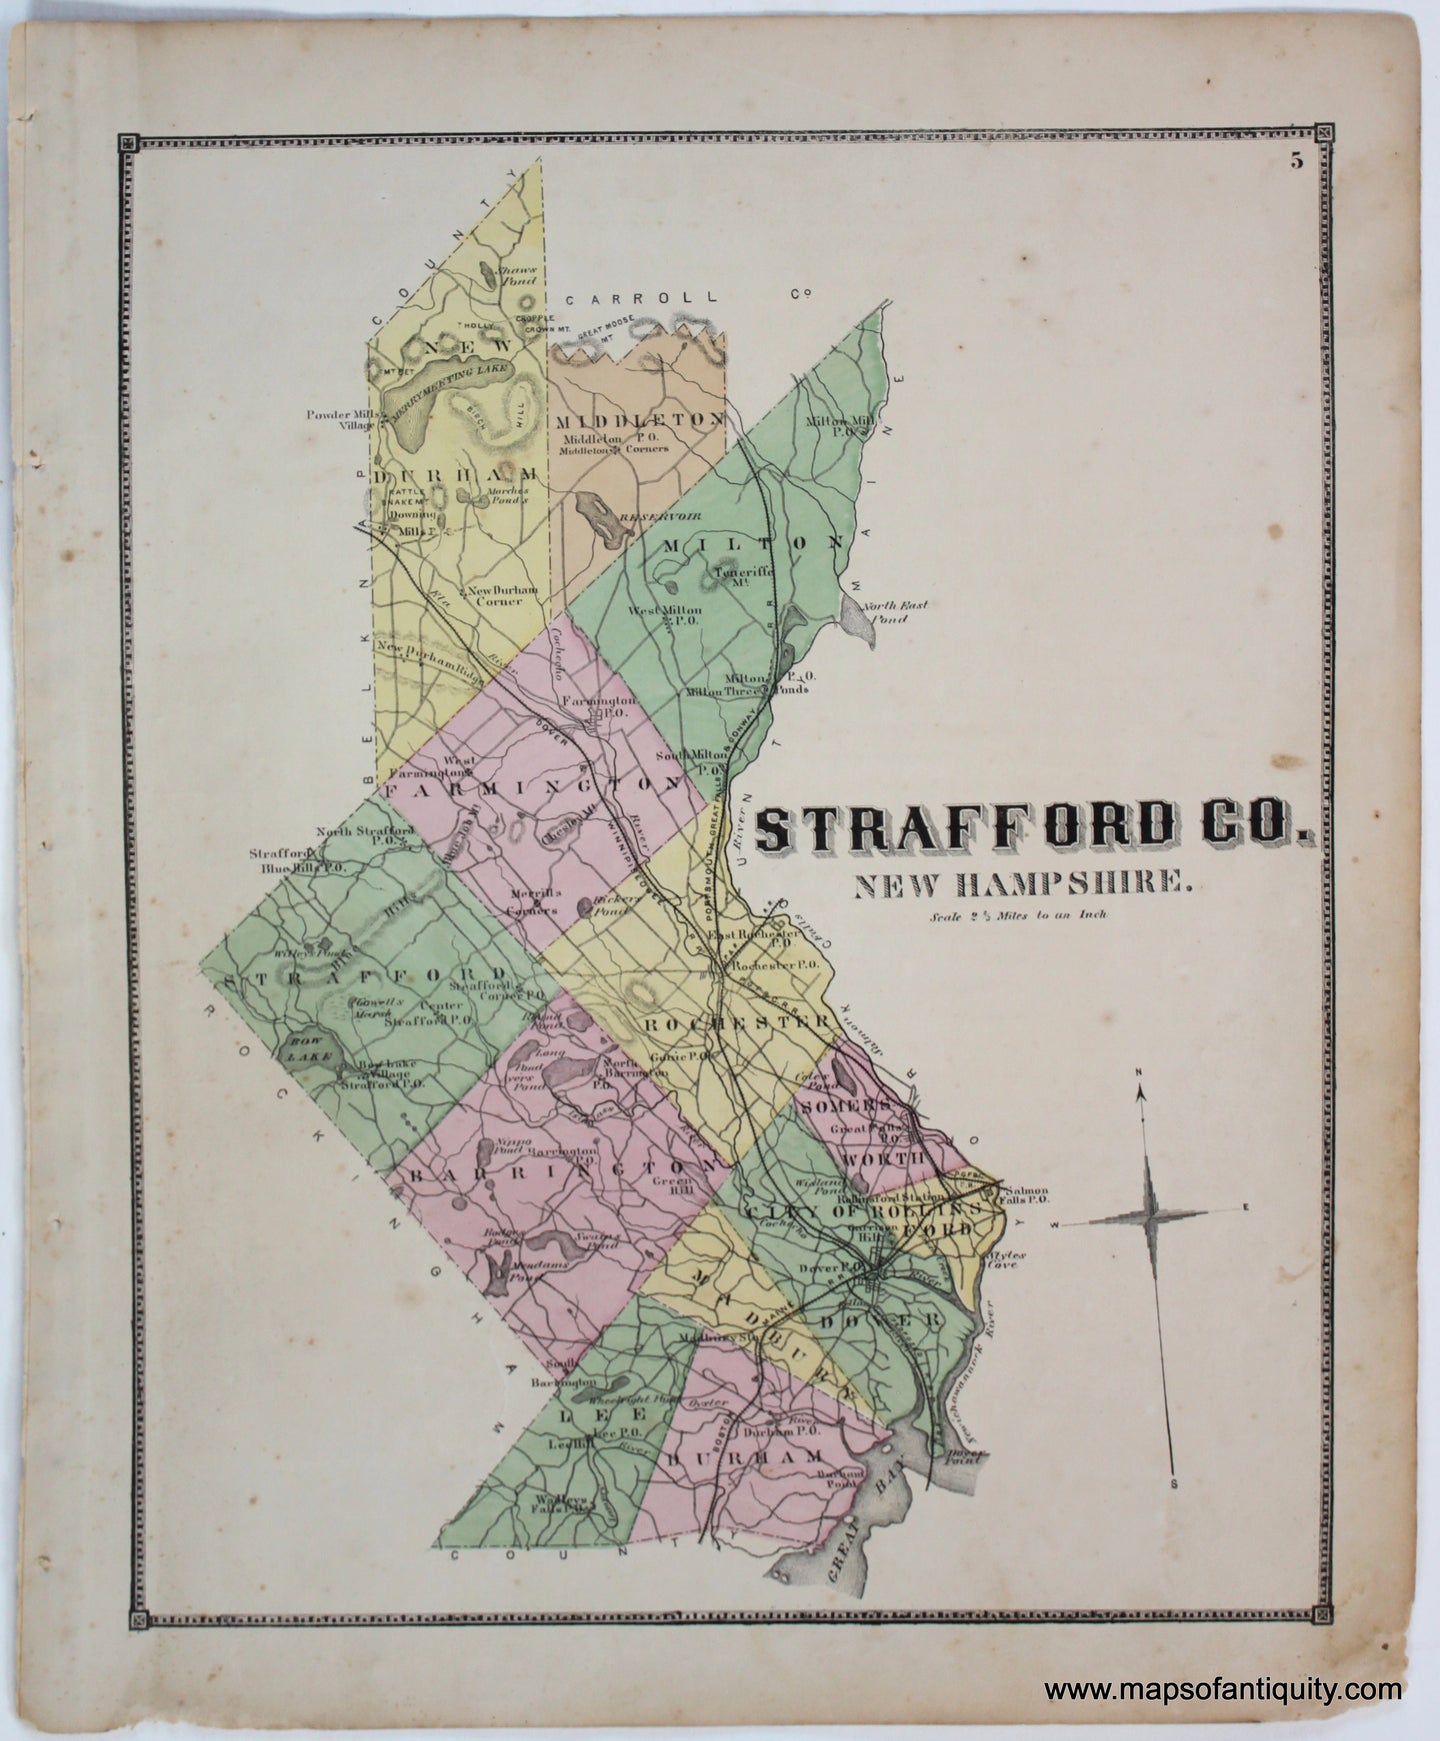 Antique-Map-Strafford-County-Town-Towns-New-Hampshire-NH-Sanford-Everts-1871-1870s-1800s-Mid-Late-19th-Century-Maps-of-Antiquity